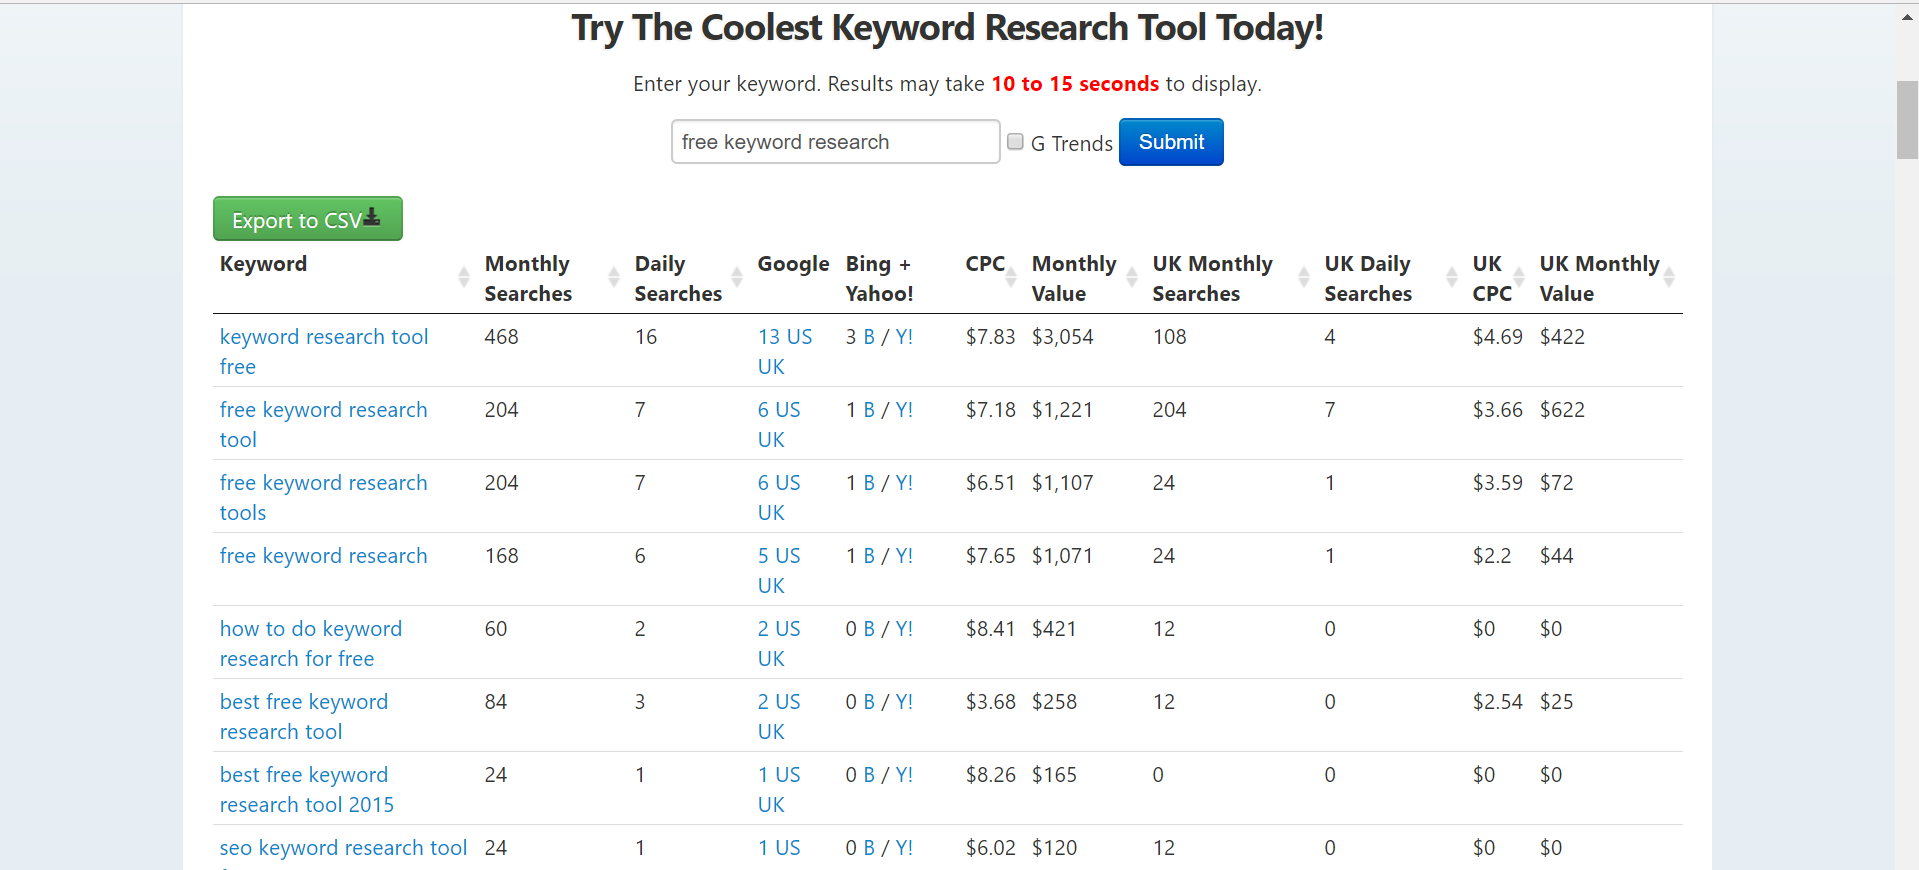 6 Top Free Keyword Research Tools of 2017